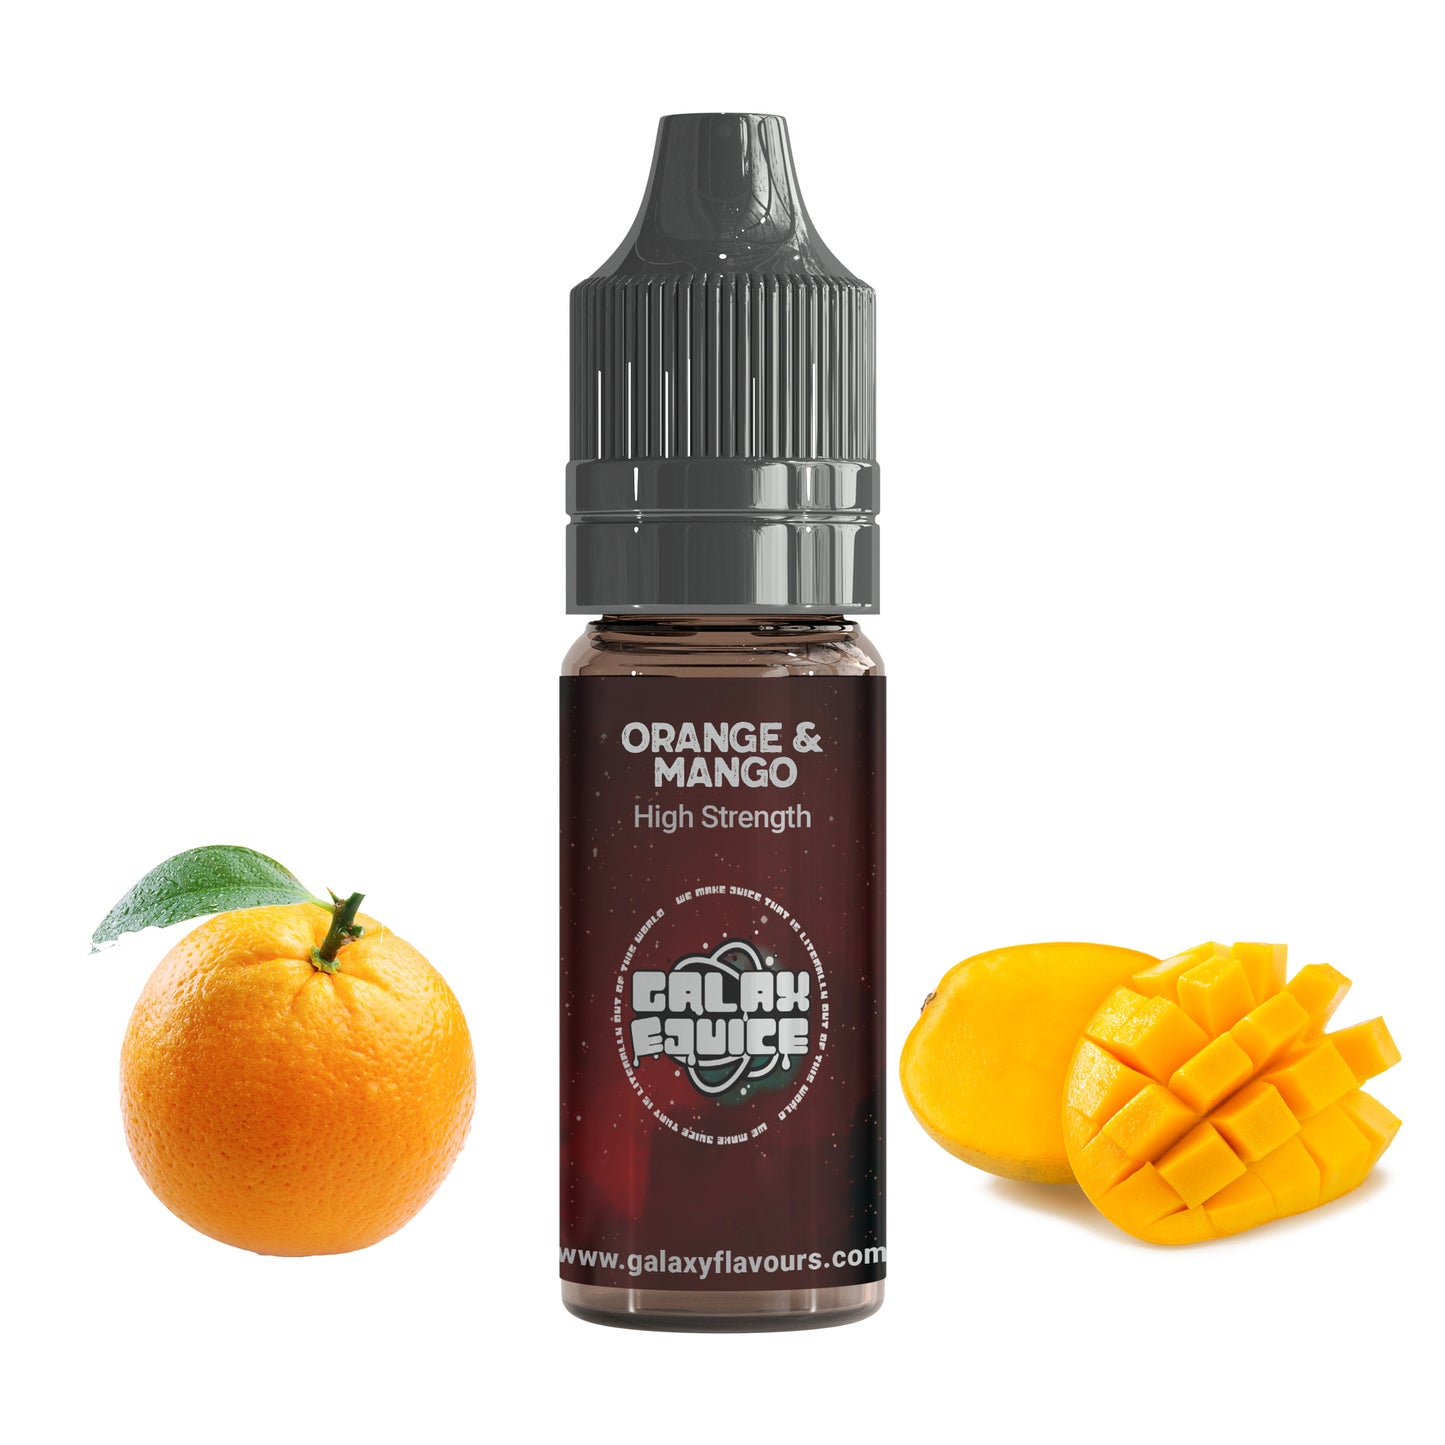 Orange and Mango High Strength Professional Flavouring.